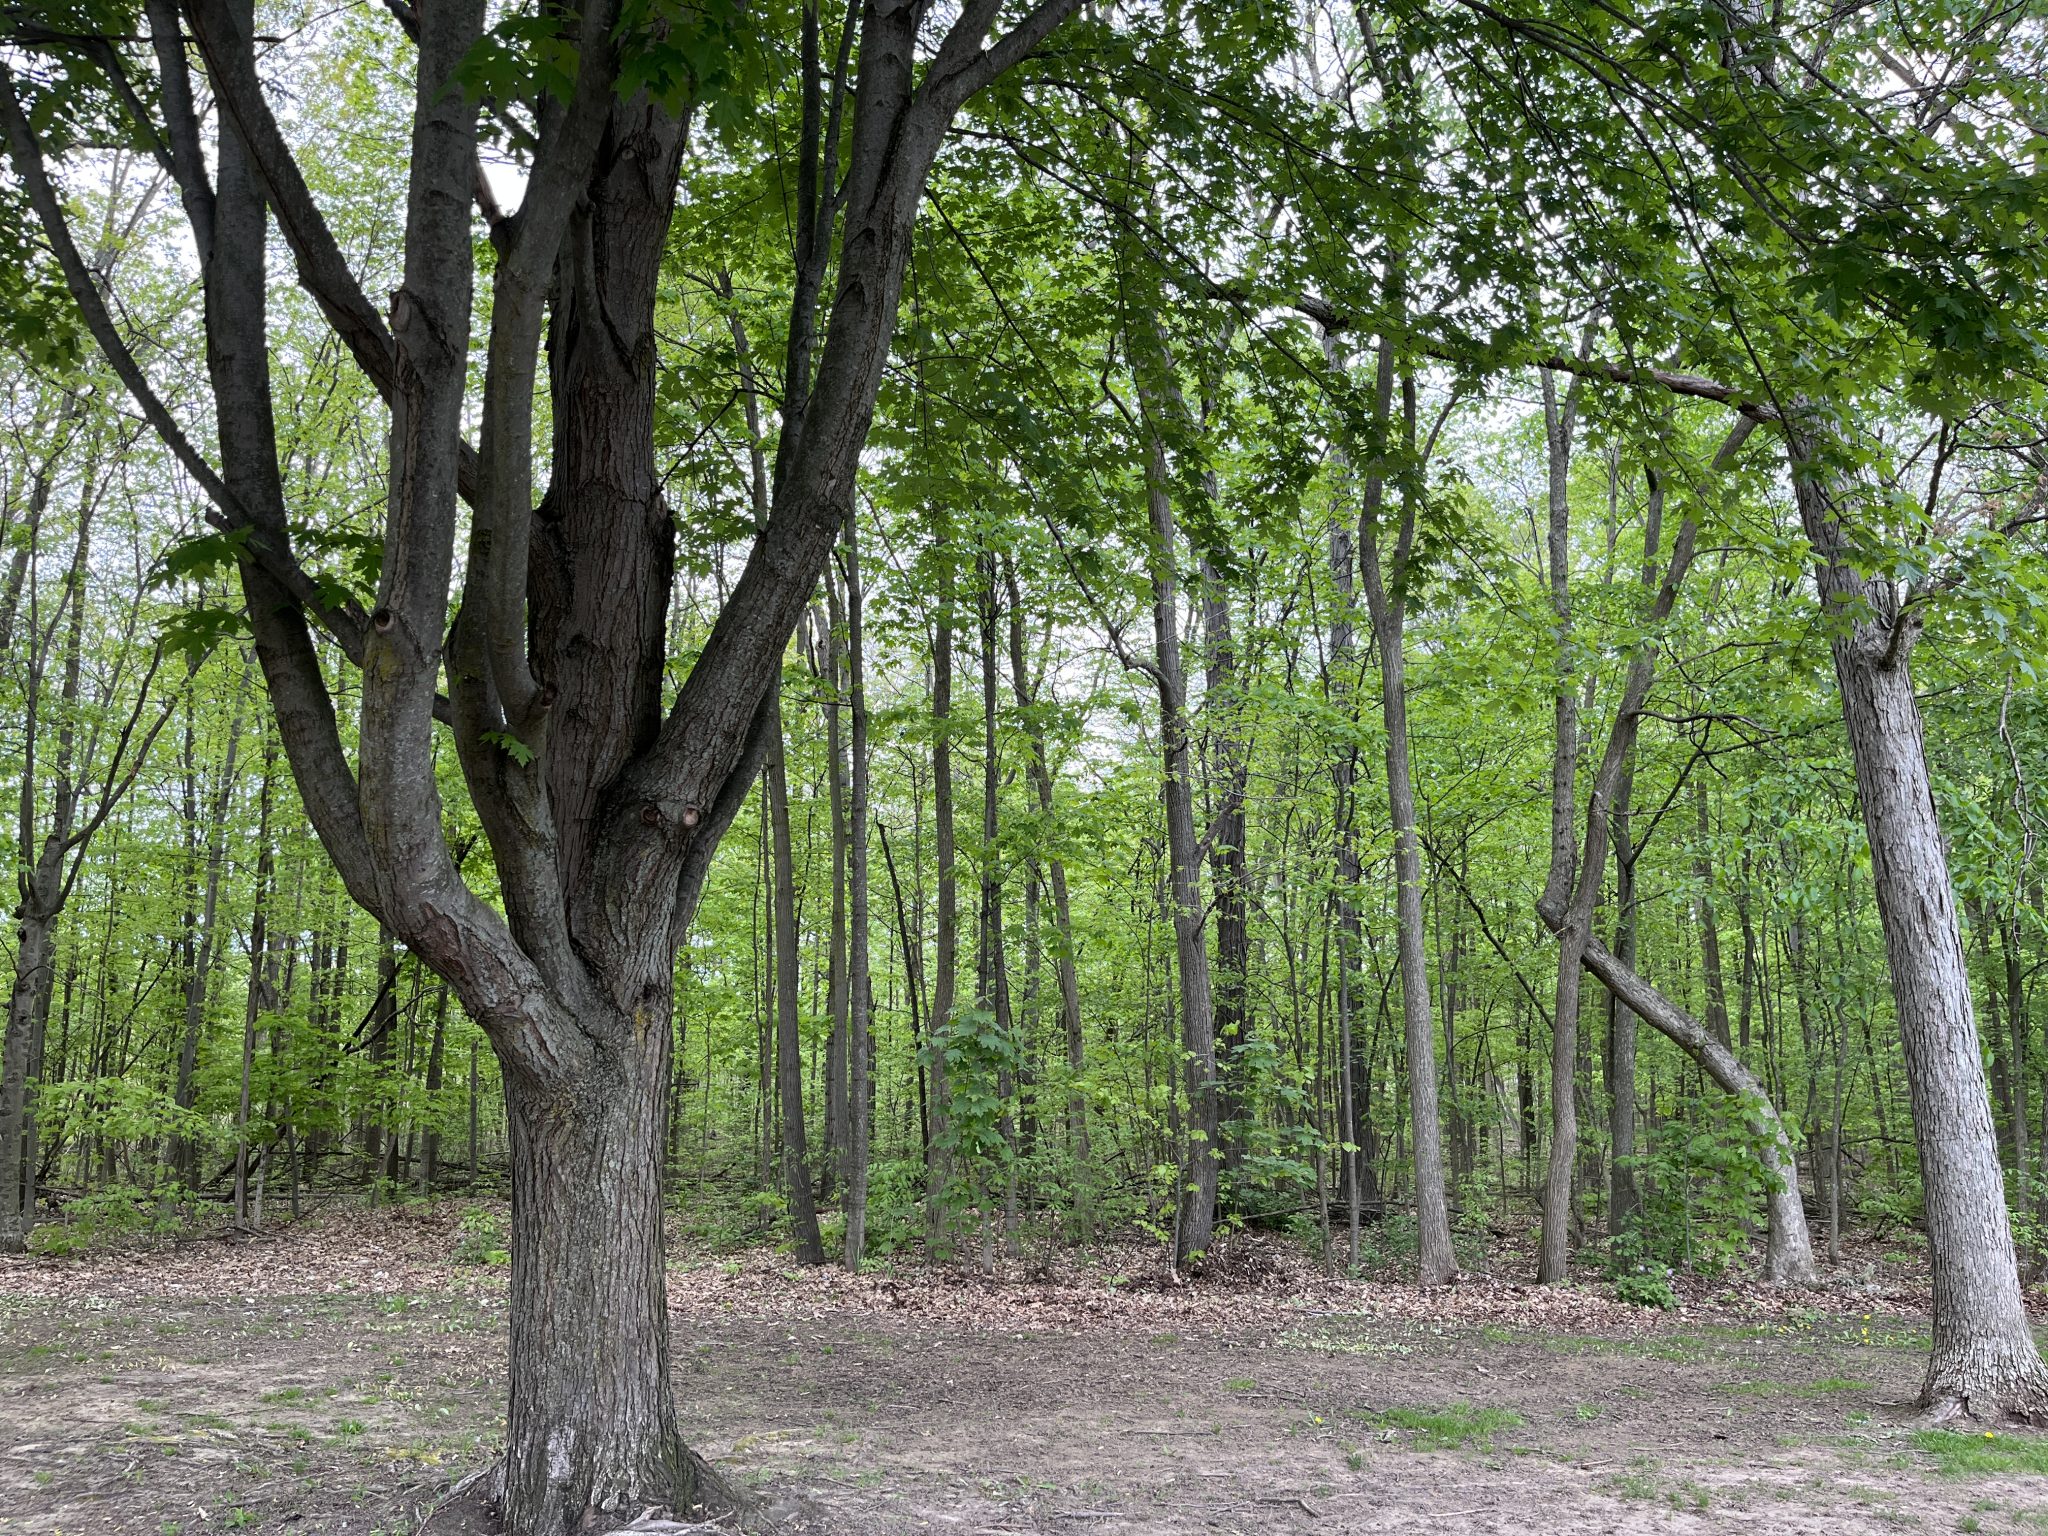 Large tree in a small clearing with forest in the background.